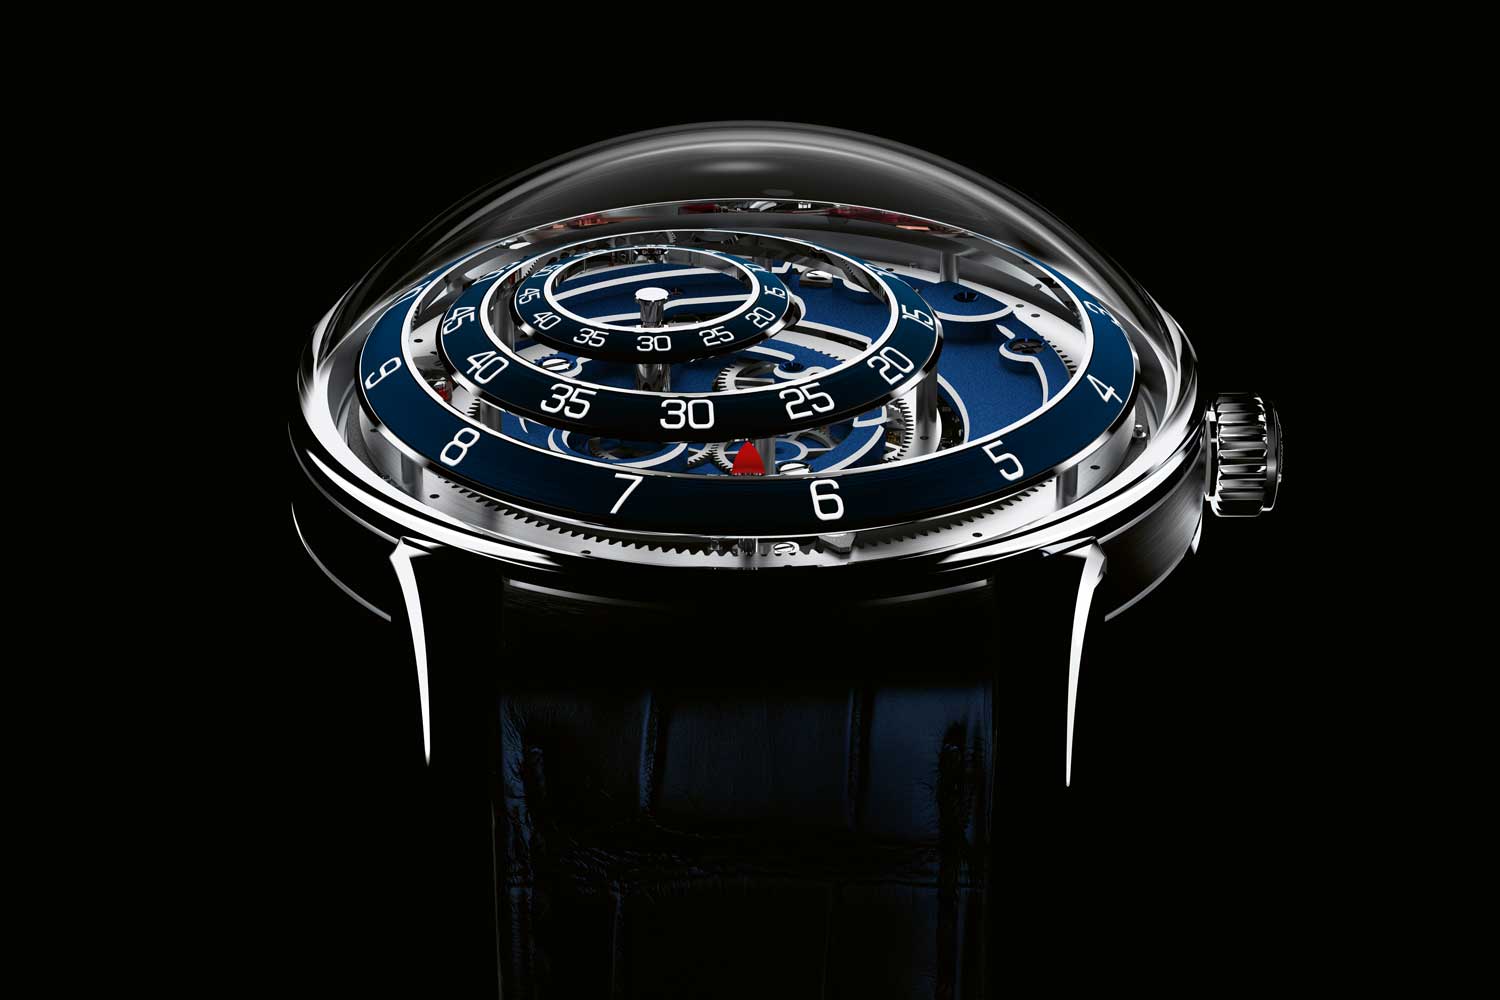 Grail Watch 3: Trilobe Une Folle Soirée "Wild Night"; The precision of the pad-printed numerals on the concave curved rings highlights an exceptional watchmaking know-how